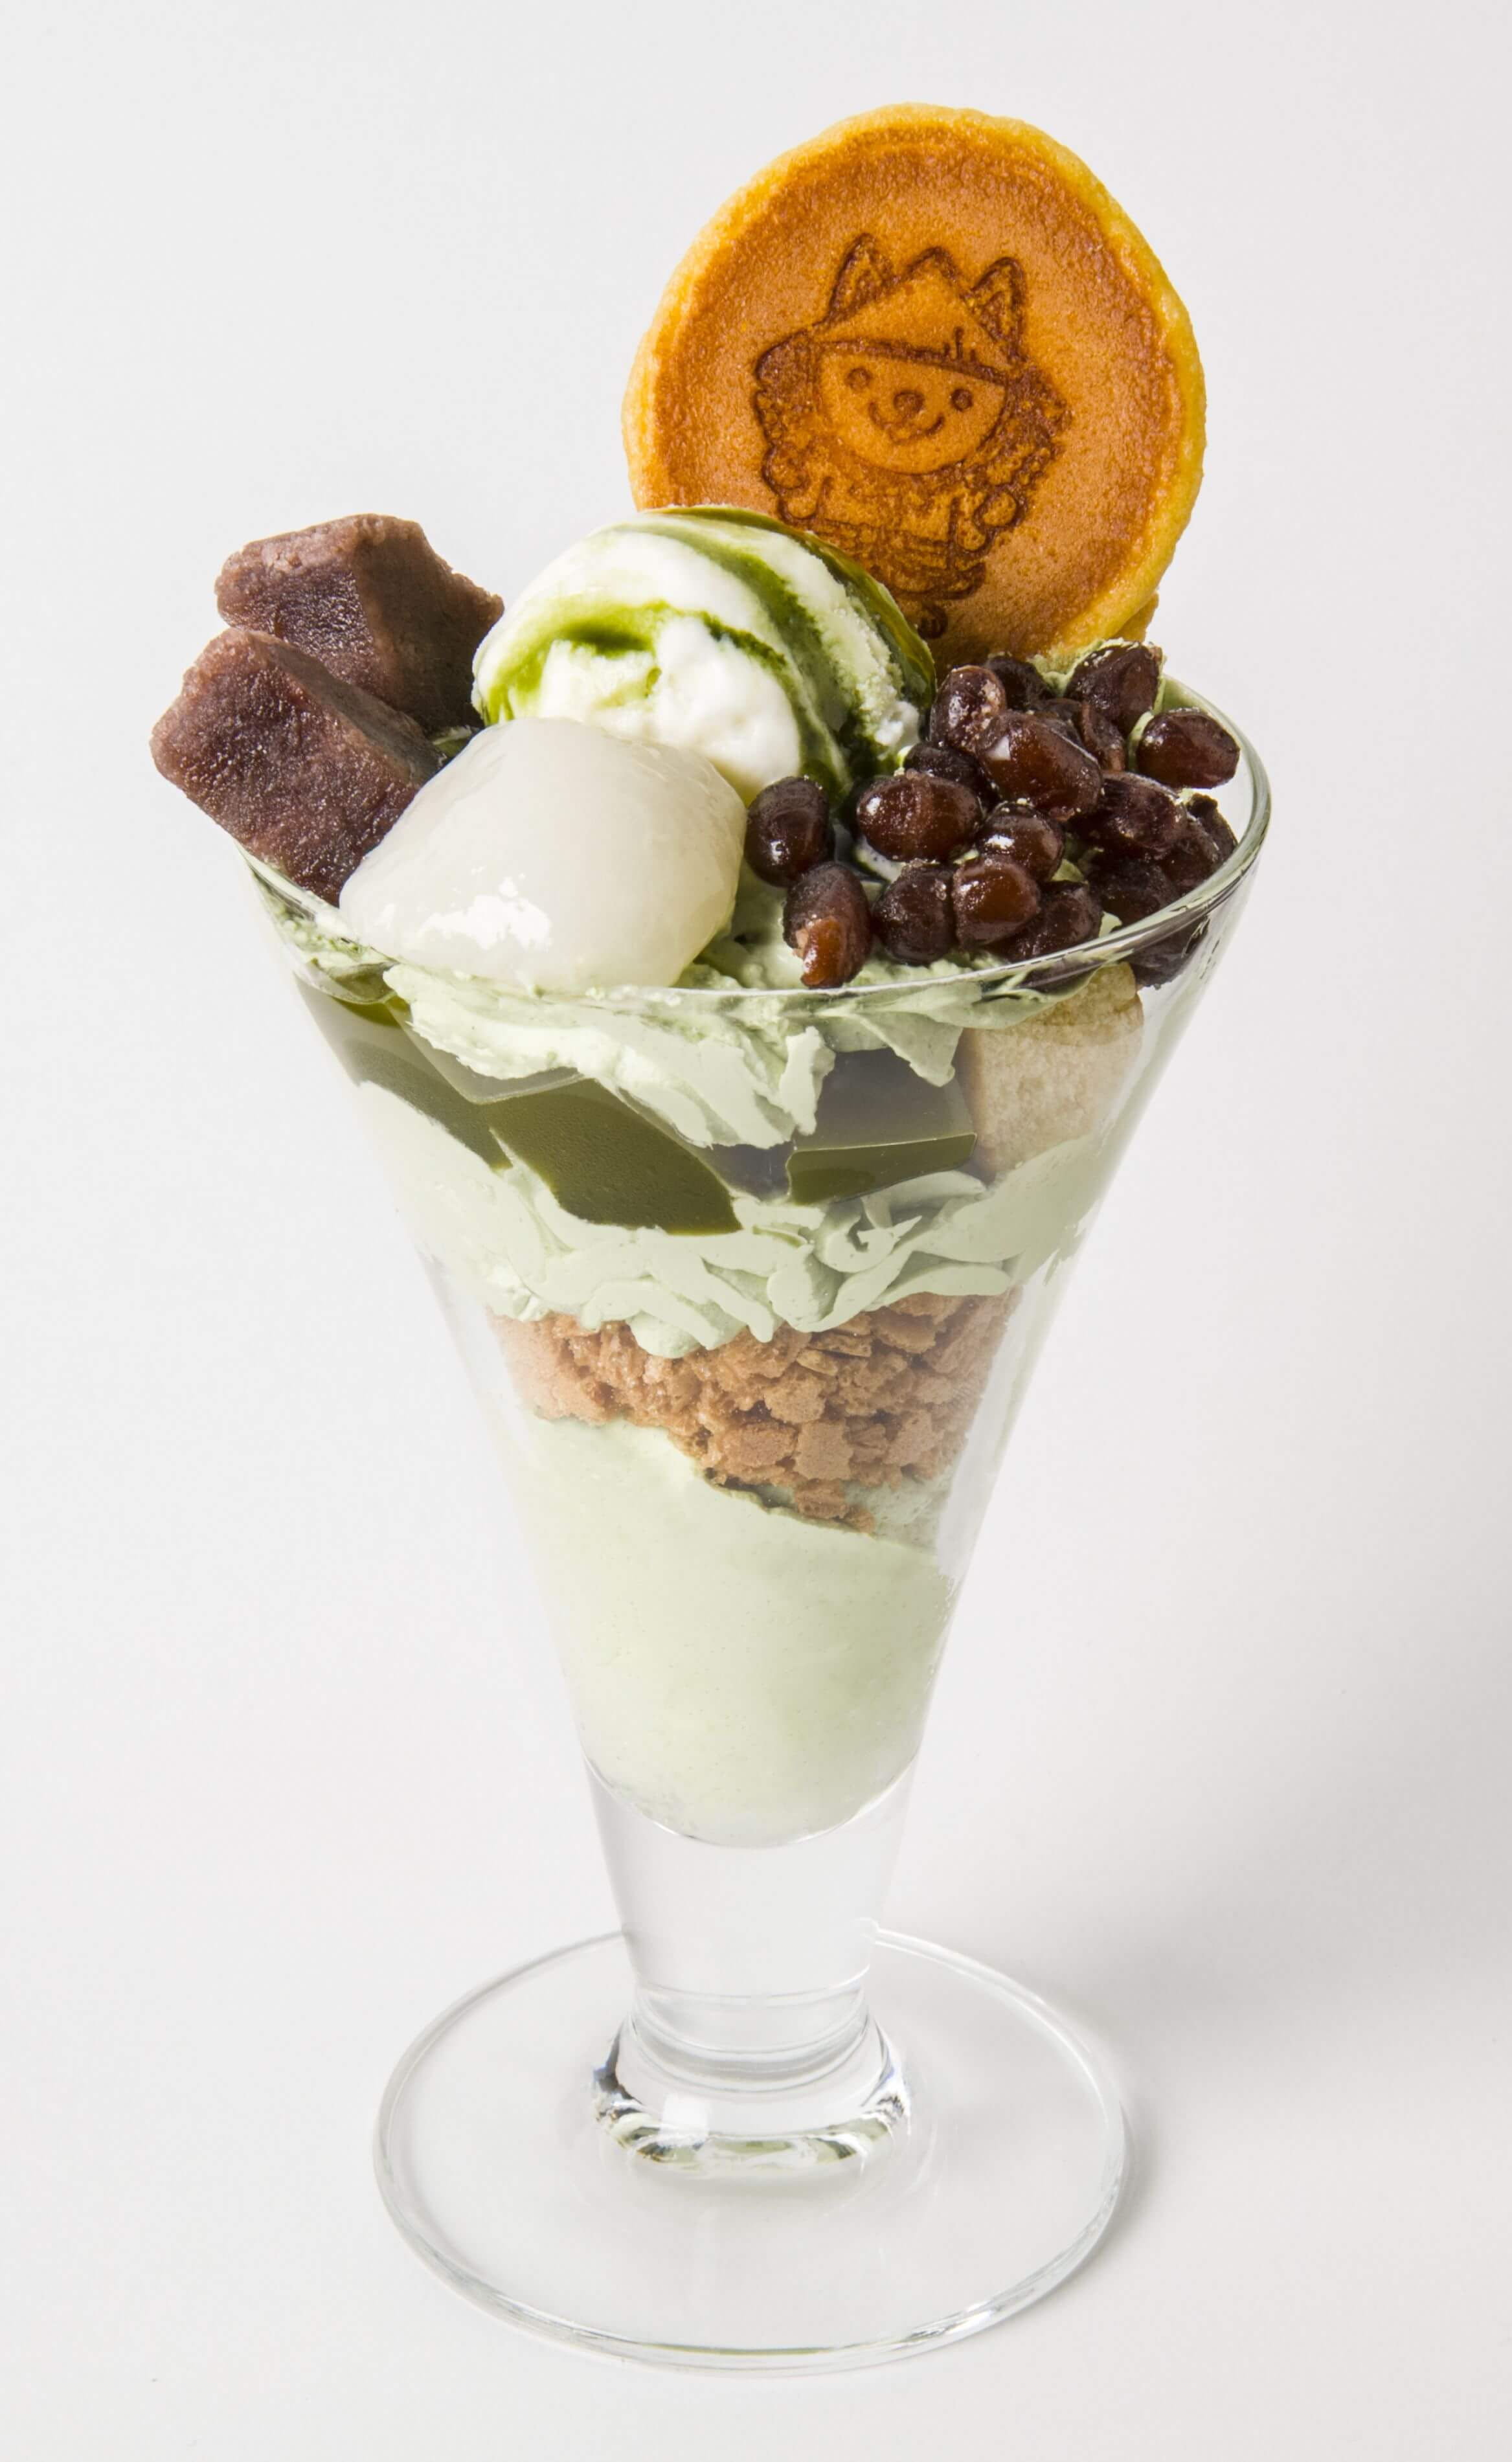 “ABENO Dessert Festival and Shaved Ice Collection” will be held at ABENO HARUKAS Kintetsu Main Store!